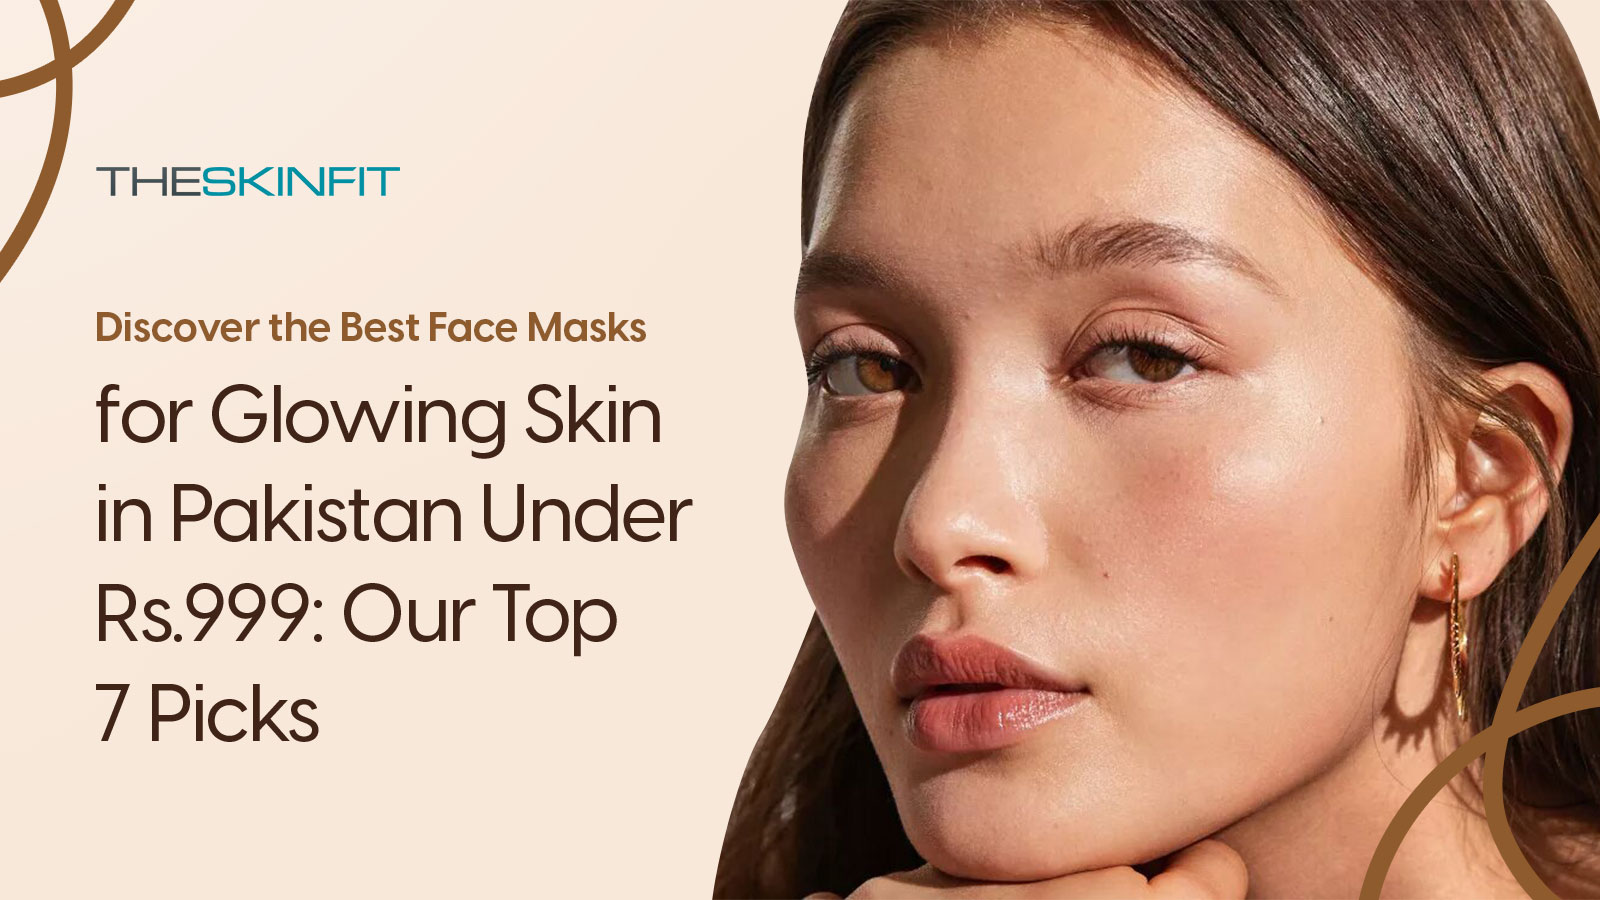 Achieve Glowing Skin On A Budget: 7 Best Face Masks Under Rs.999 In Pakistan